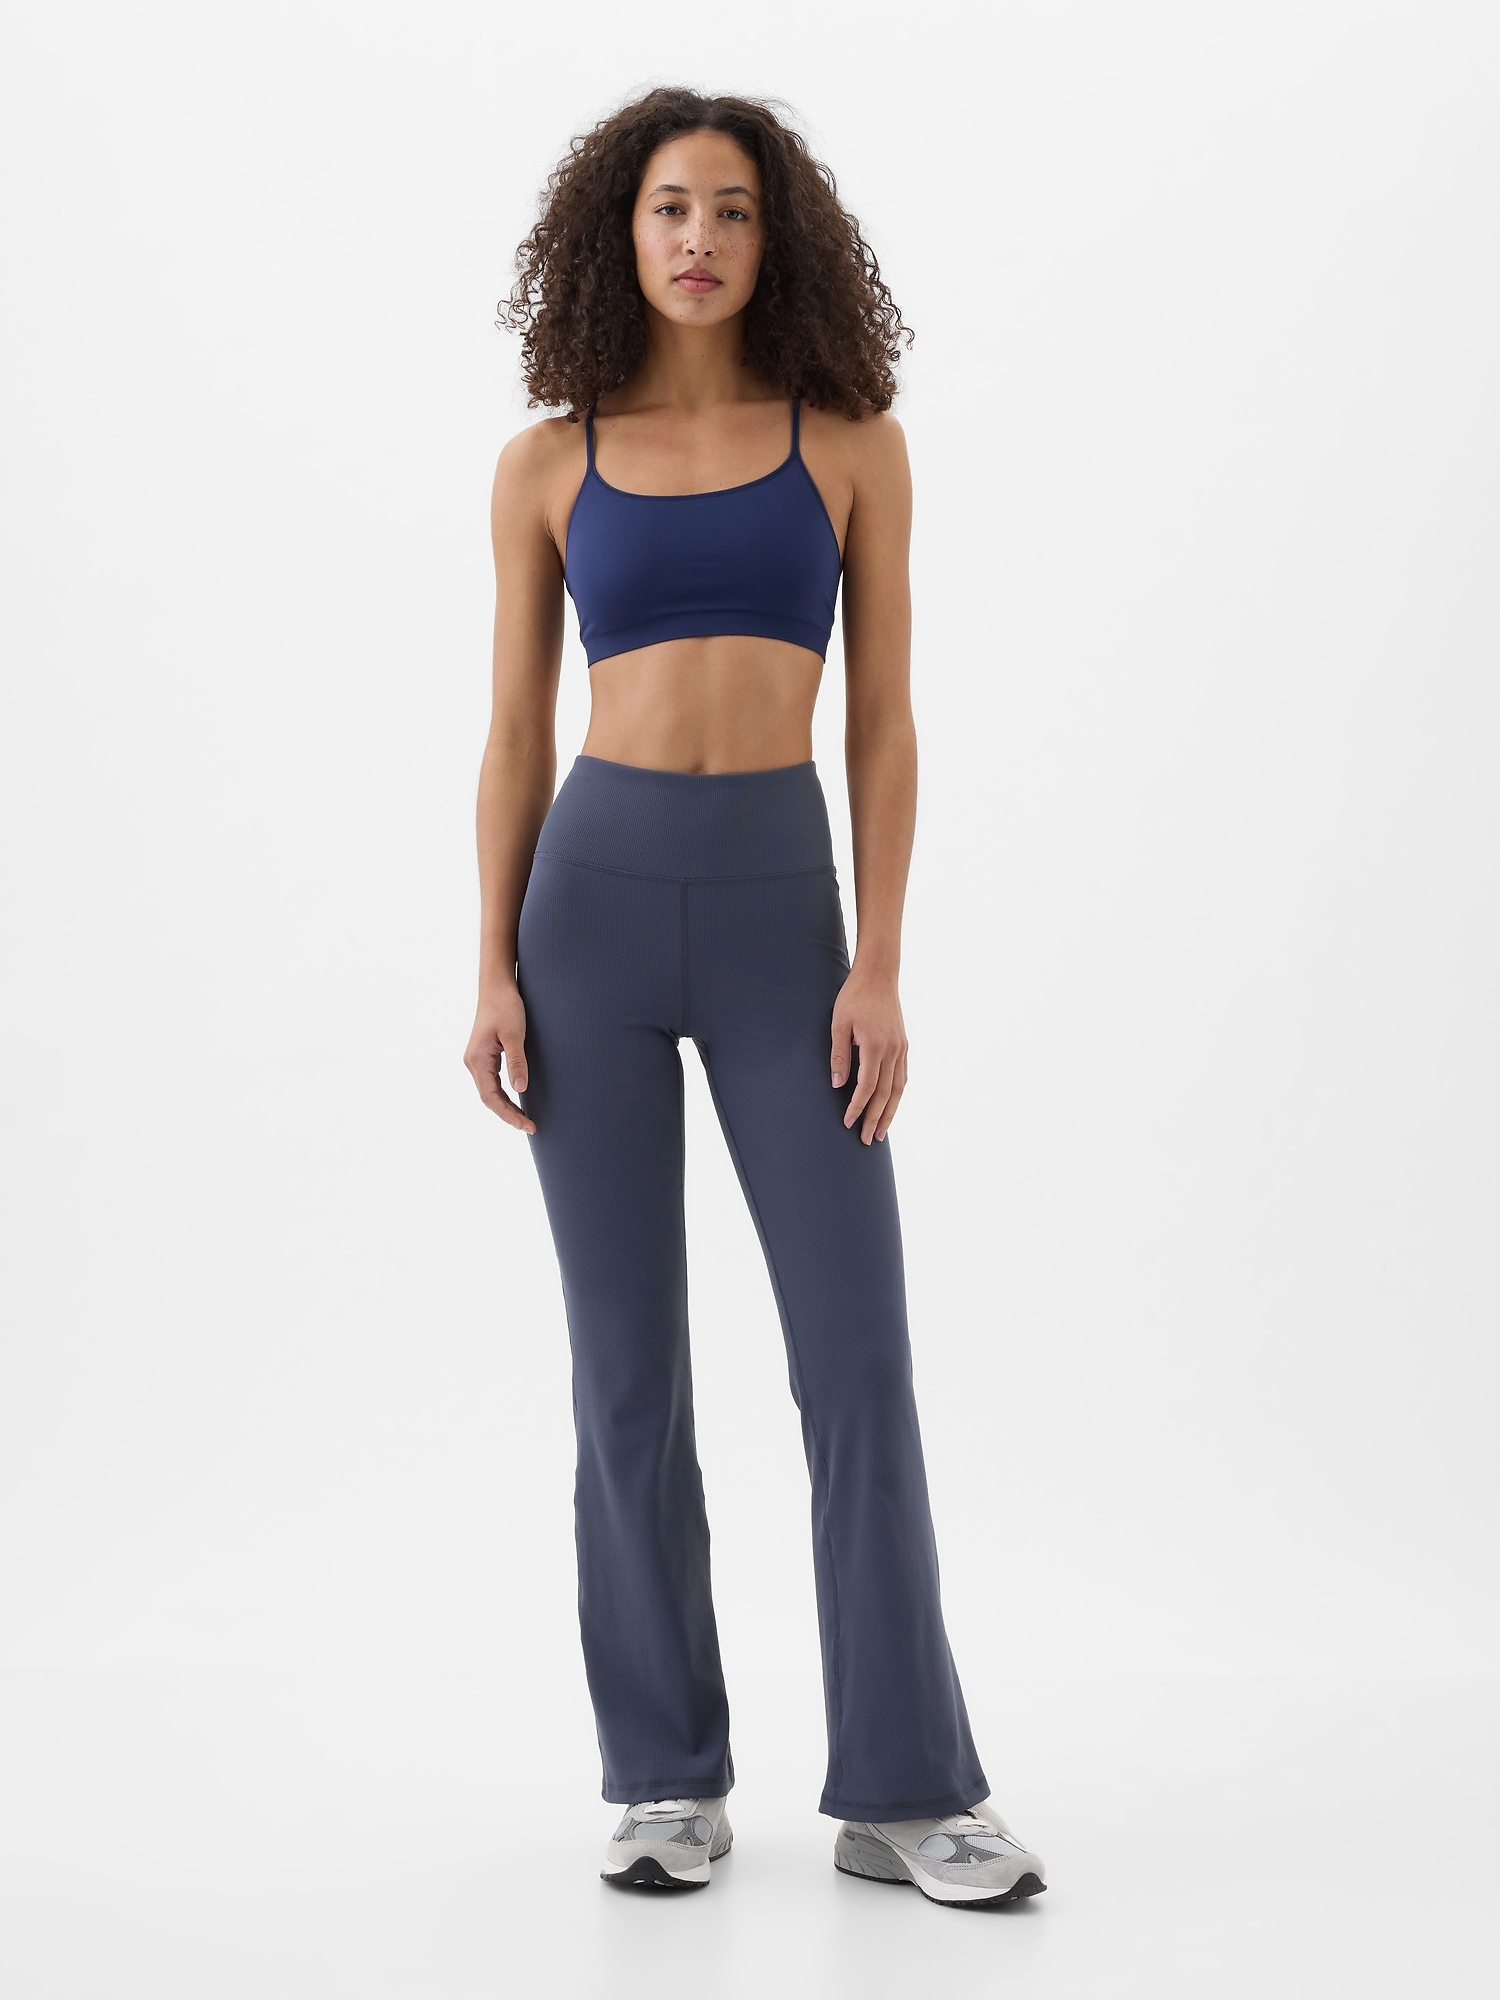 Penyelux High Waisted Stretchy Scuba Leggings and Crop Top 2 Piece